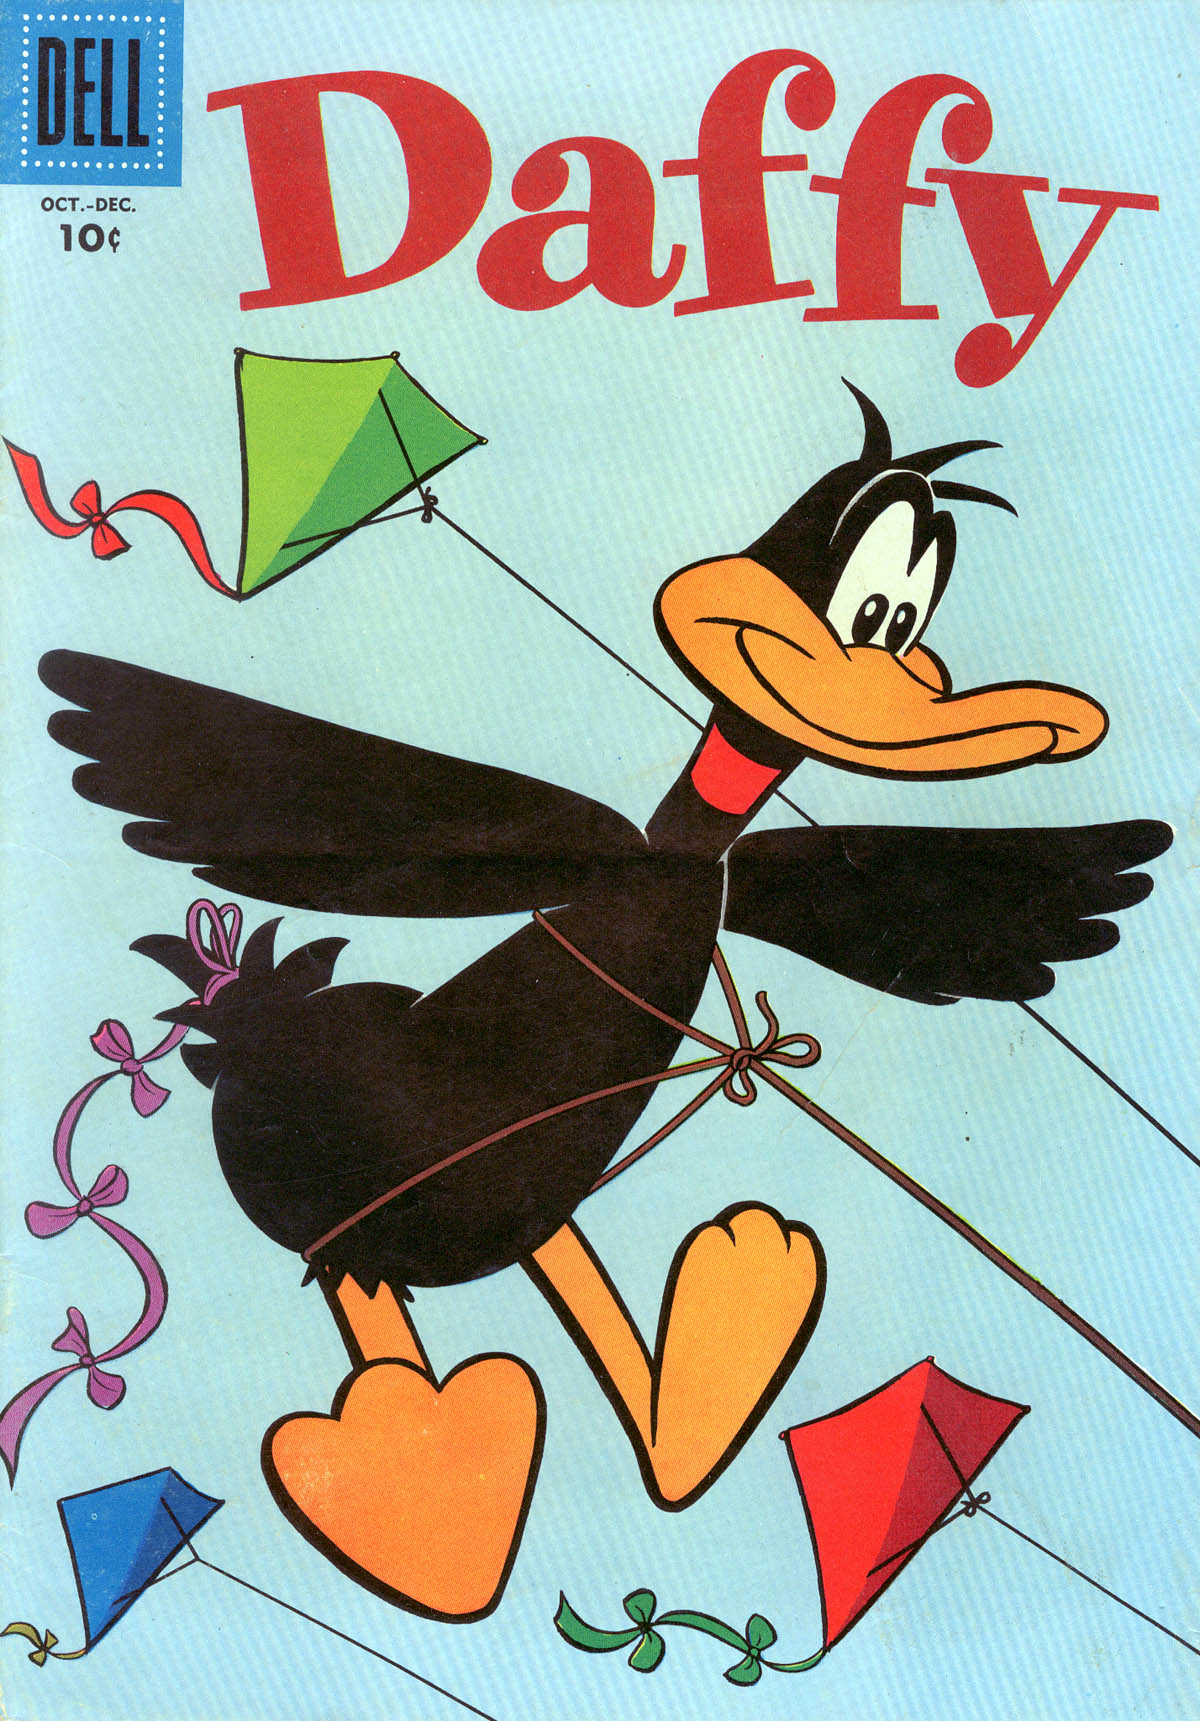 Read online Daffy comic -  Issue #7 - 1